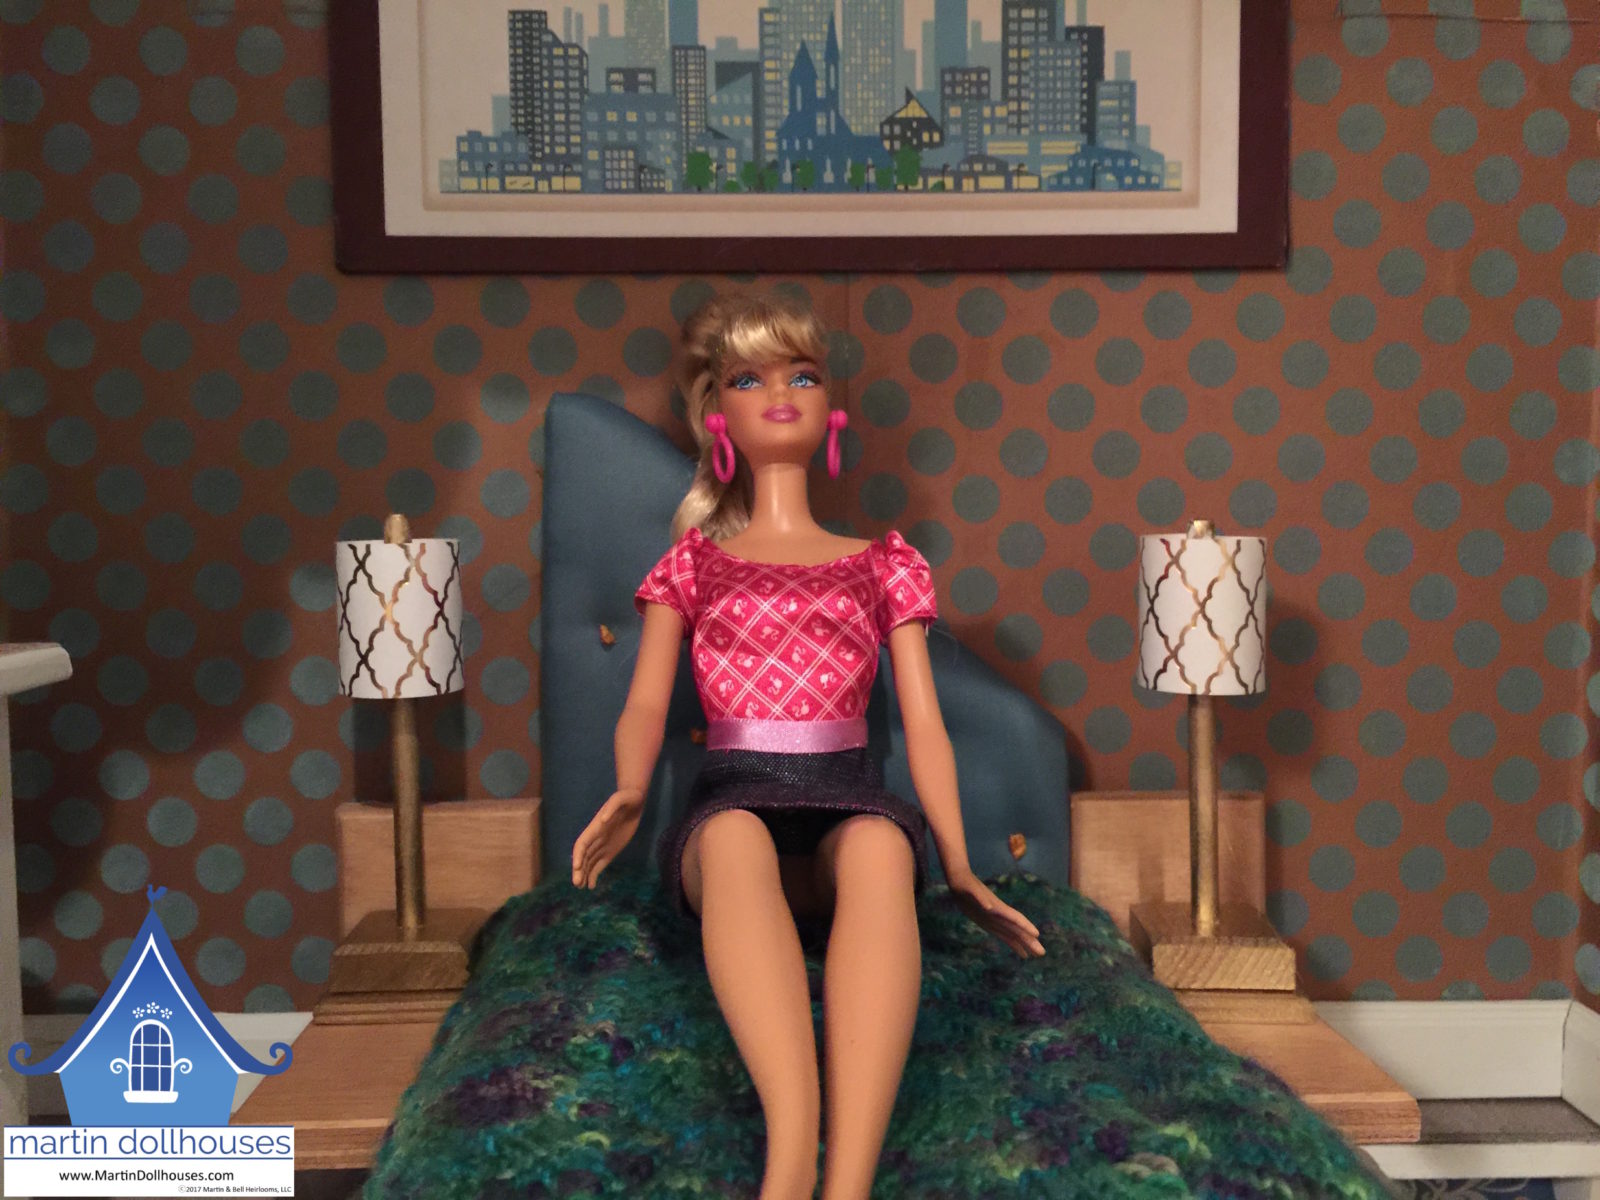 Barbie enjoying her Barbie dollhouse lamp and bed with mattress.